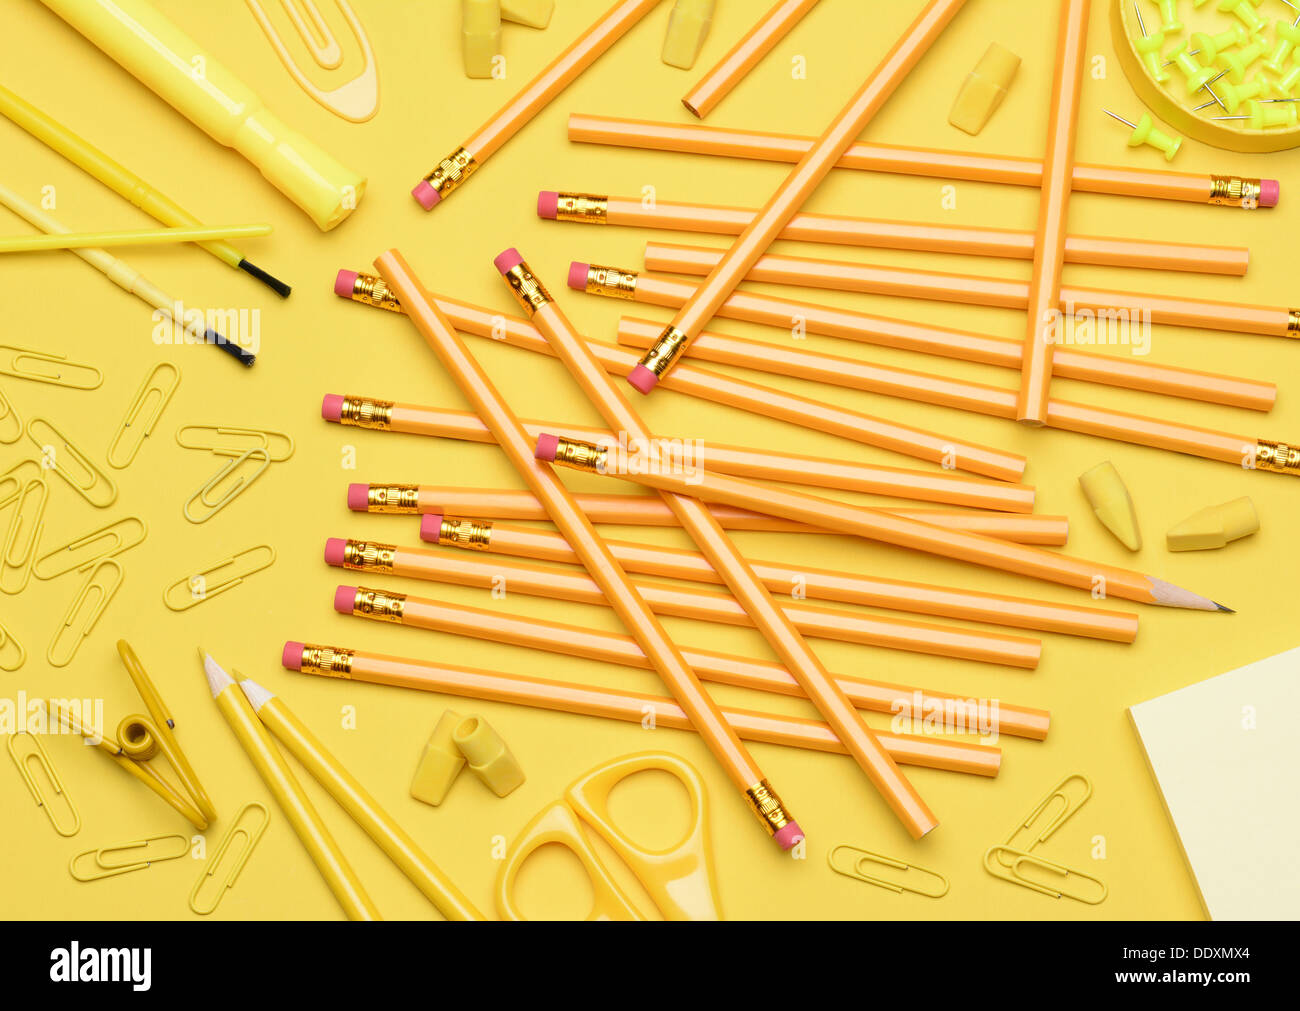 Yellow School Supplies. Pencils, erasers, paper clips, brushes, pins, scissors, paper laying in a random pattern Stock Photo